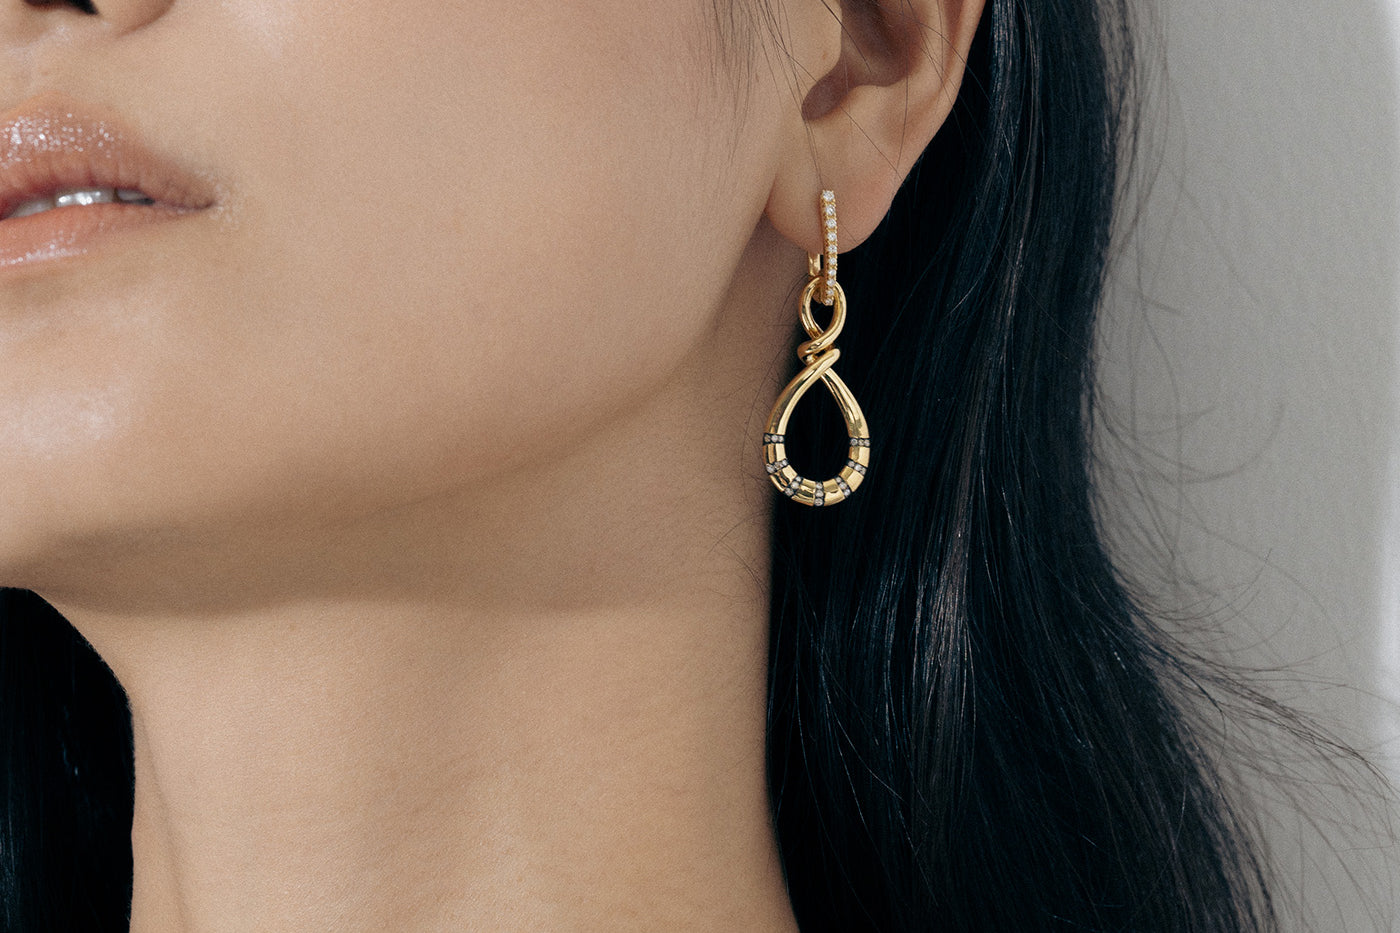 Yellow Gold Earrings in an uneven figure 8, with Rhodium Plated notches and Diamonds - Model shot